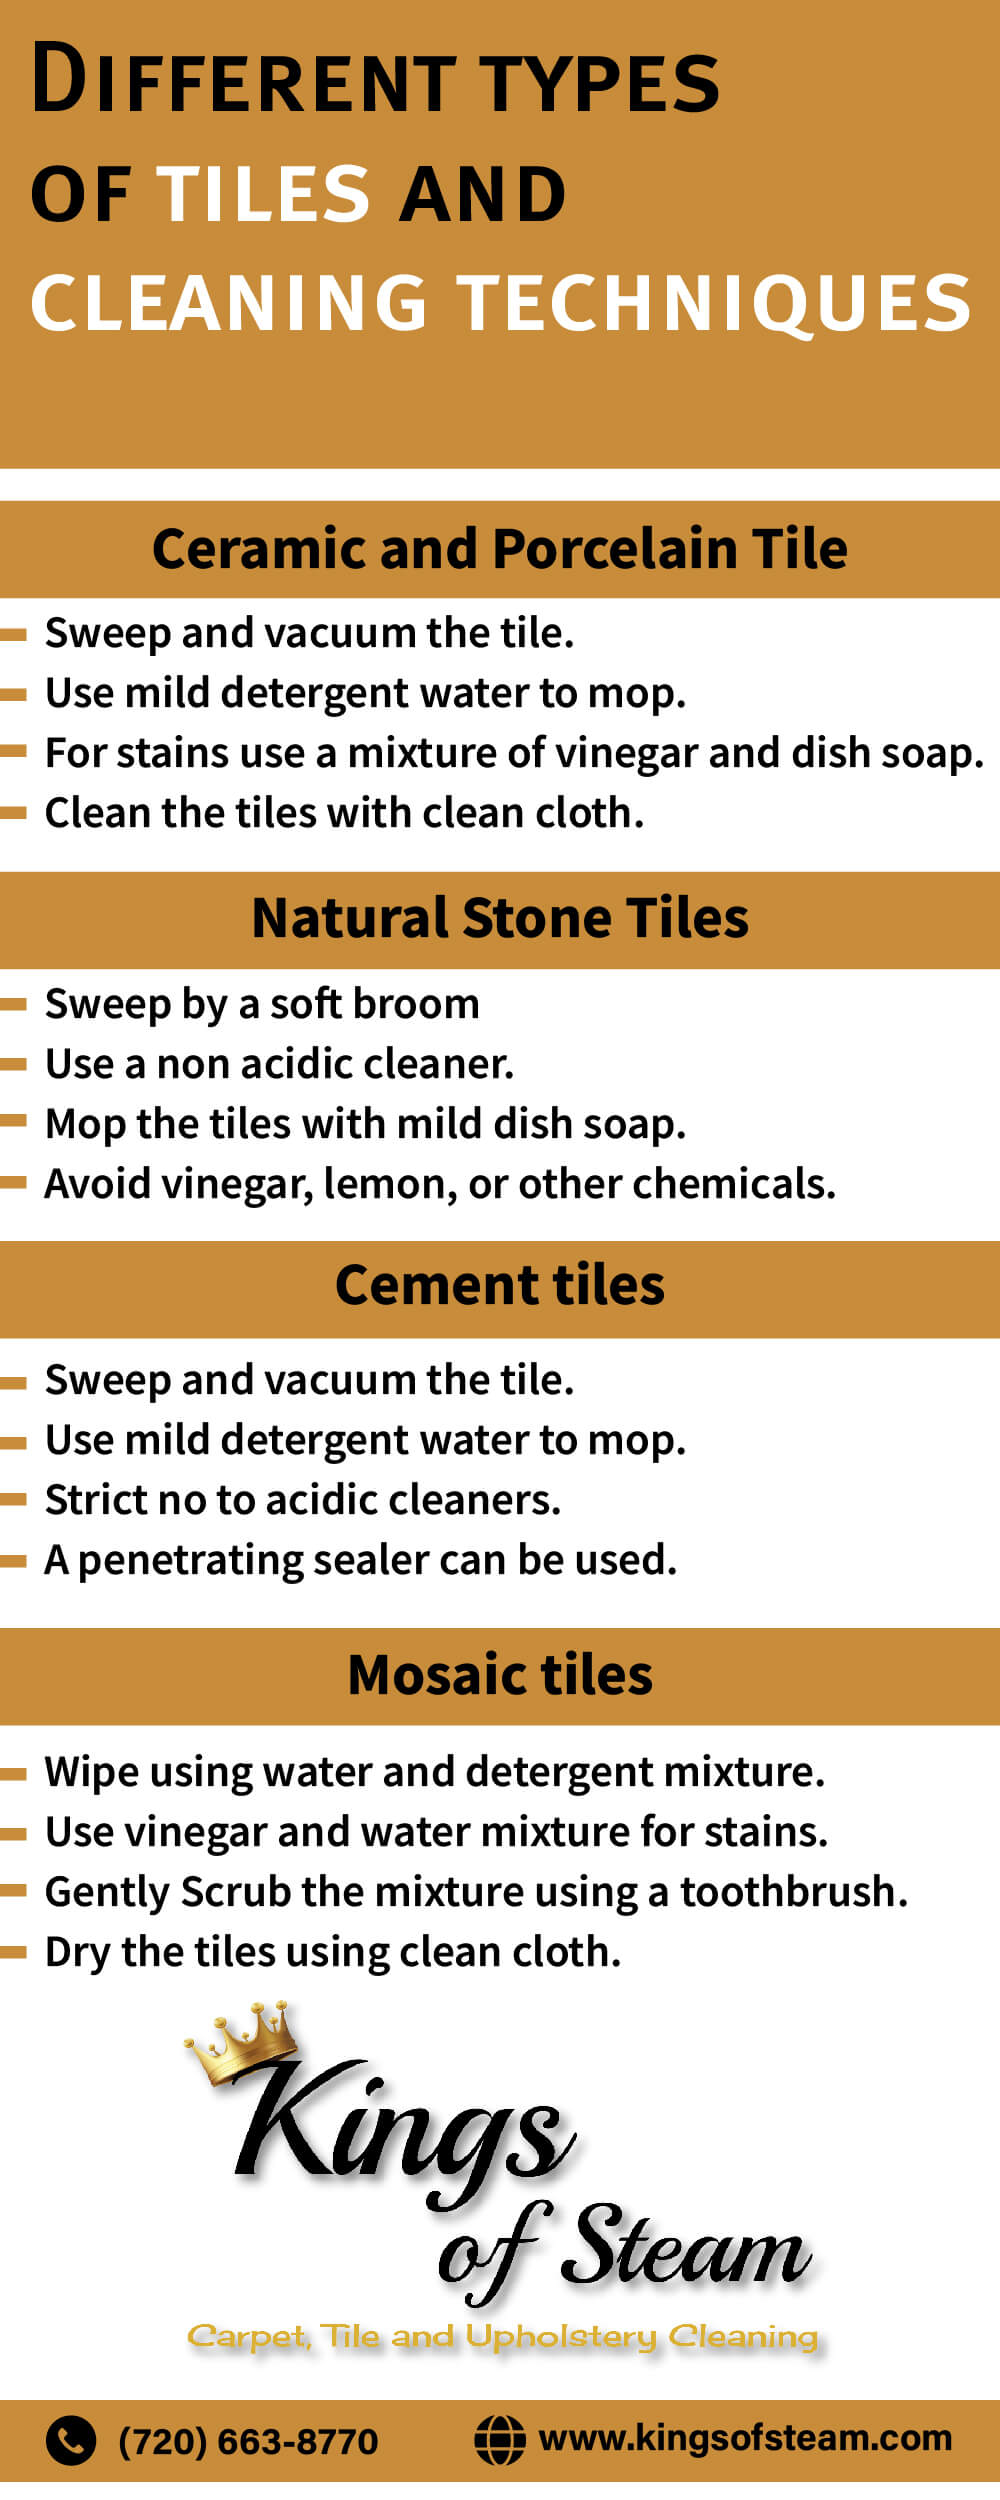 Different types of tiles and cleaning their techniques